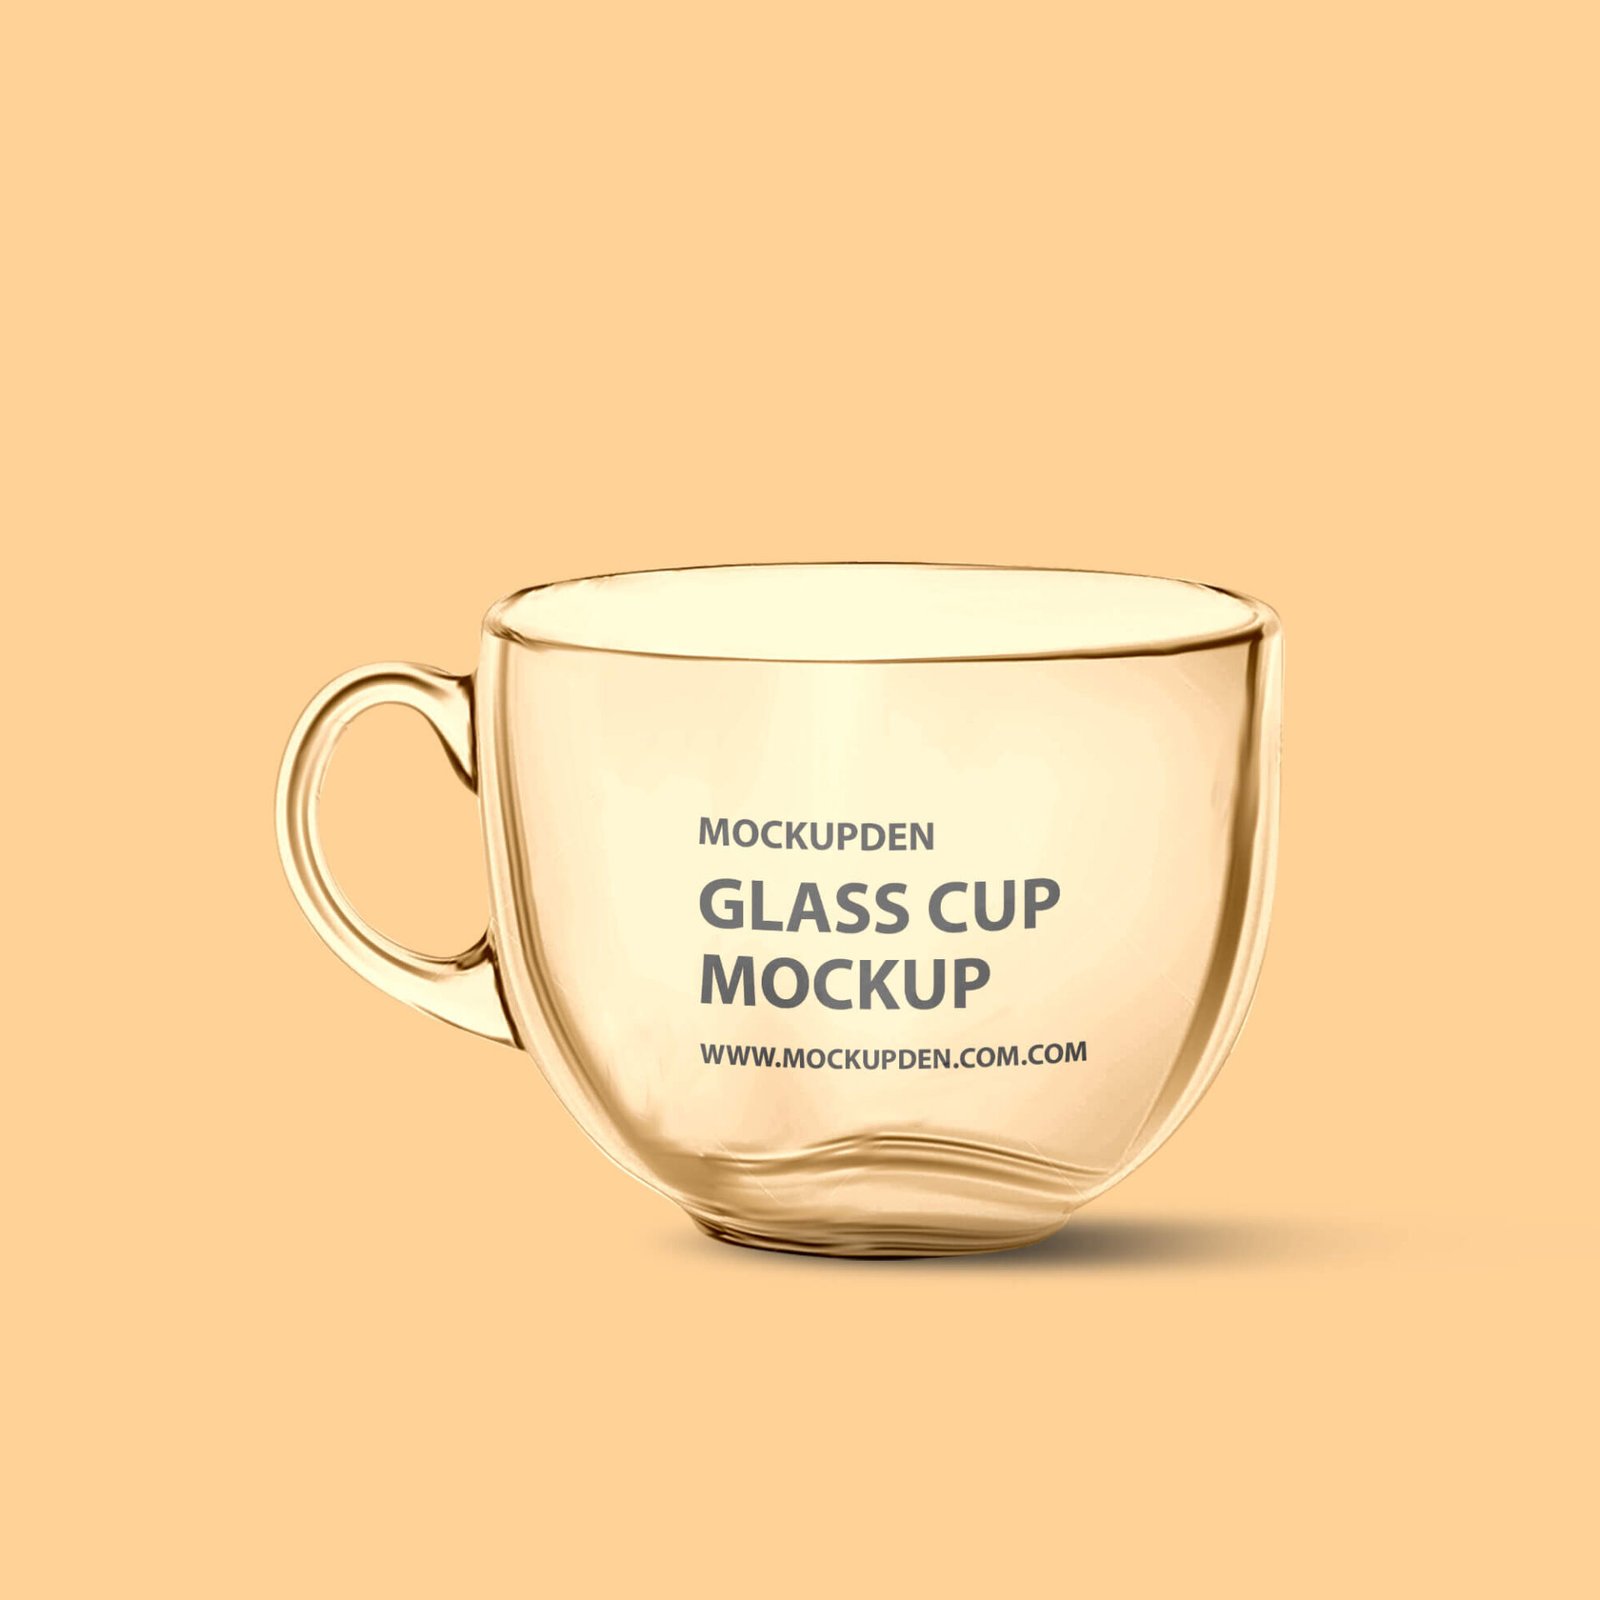 Download Free Glass Cup Mockup PSD Template - Mockup Den